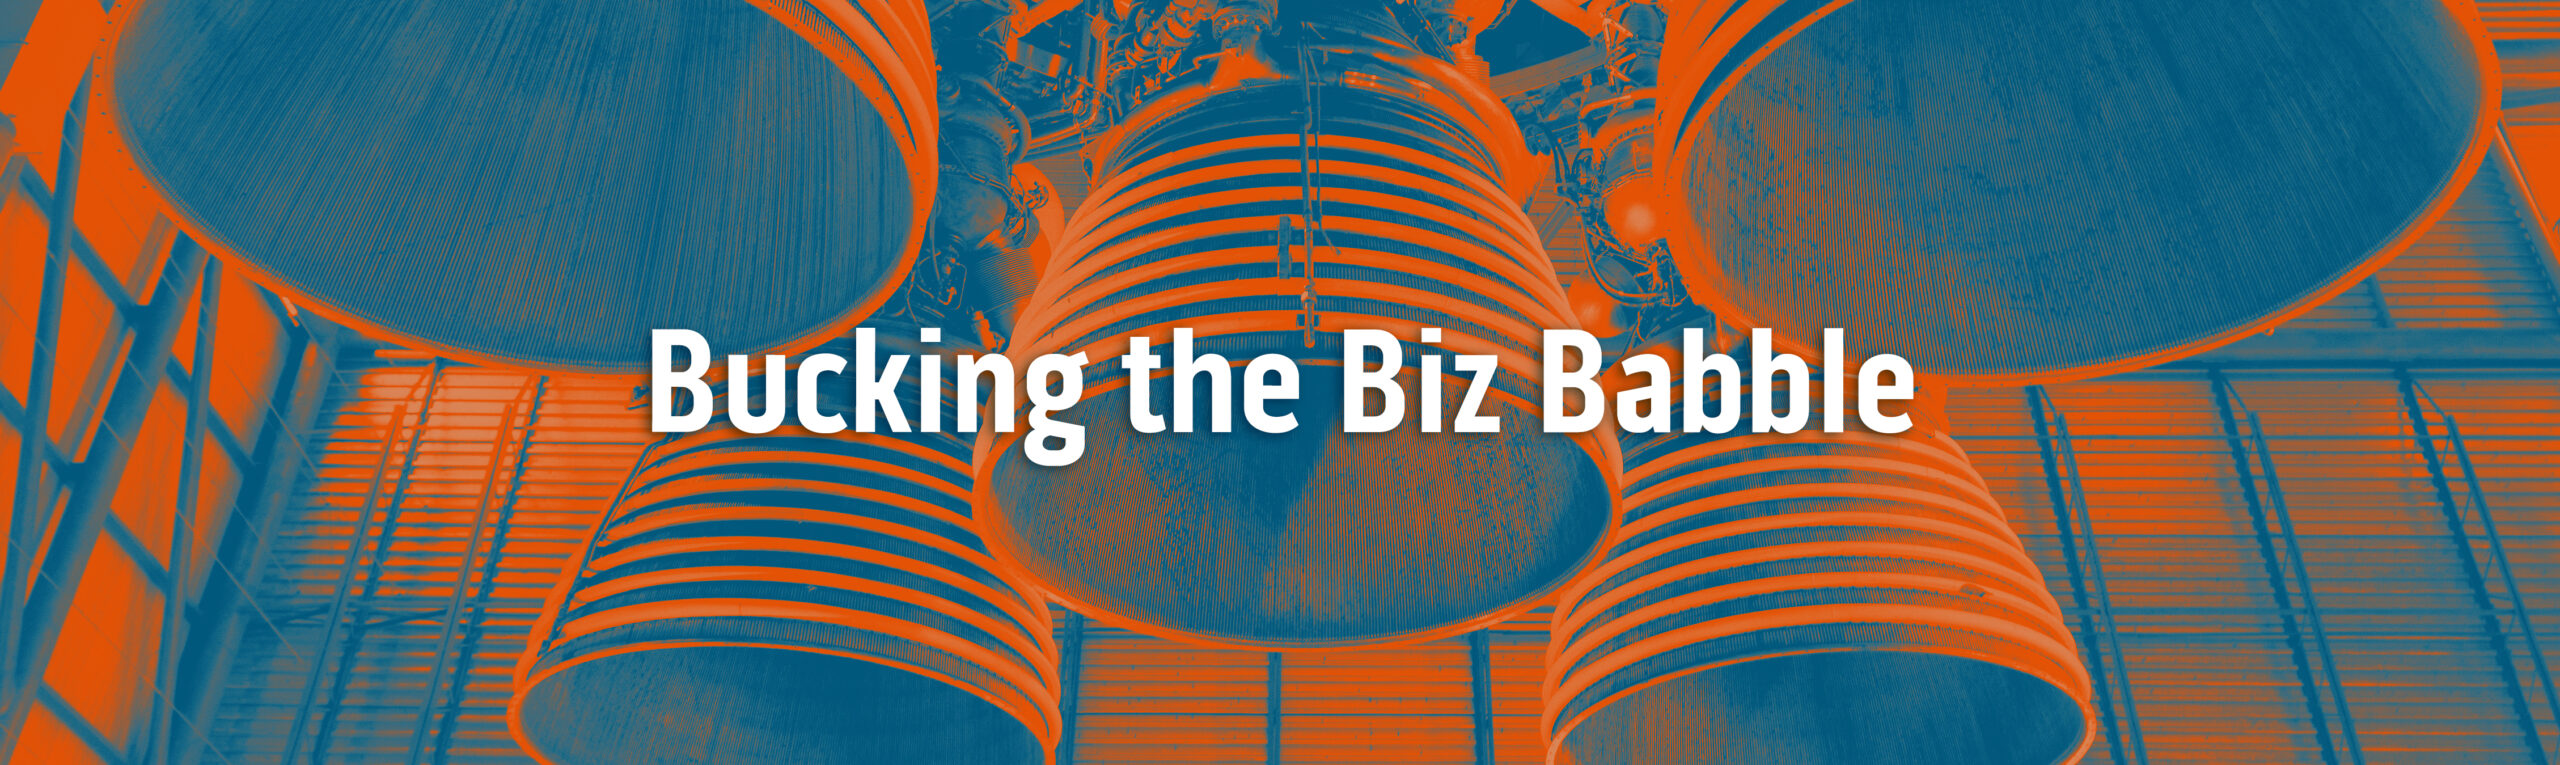 White text that says: Bucking the Biz Babble," overlayed close up on the rocket engine and exhaust pipes of Saturn 5 rocket. The image is treated with a blue and orange filter.